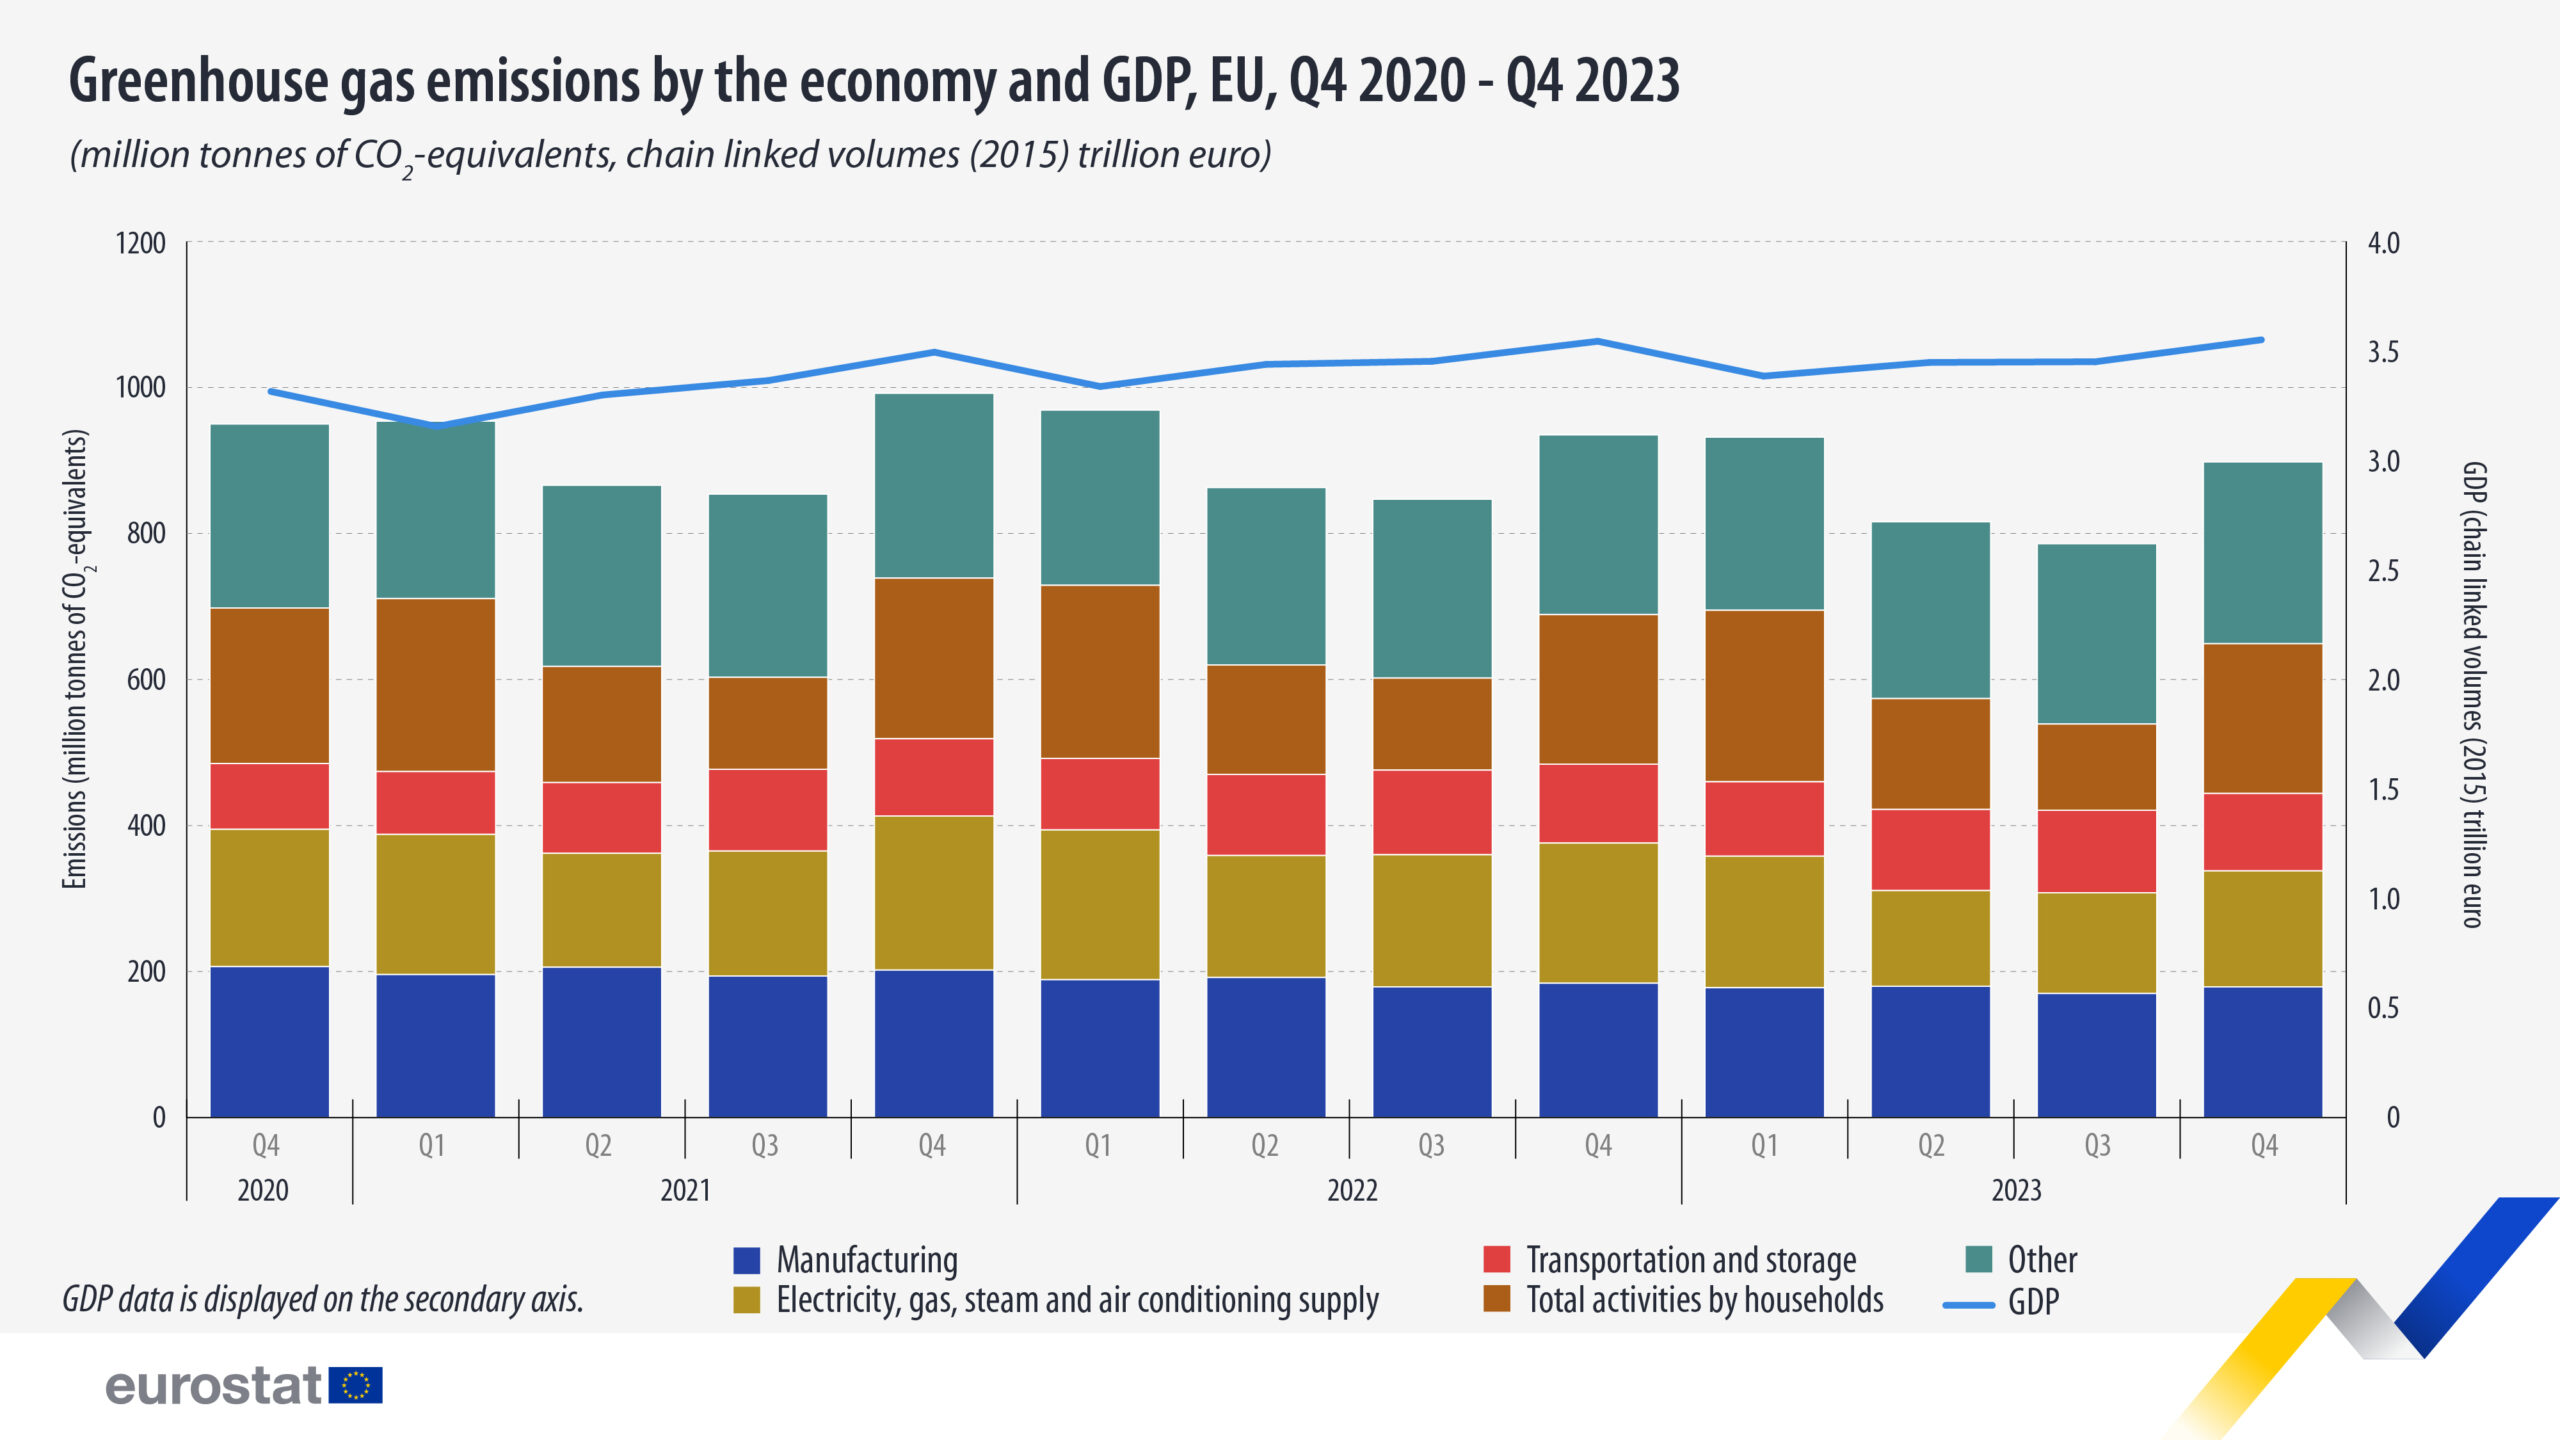 Greenhouse gas emissions in the EU economy decrease by 4.0%